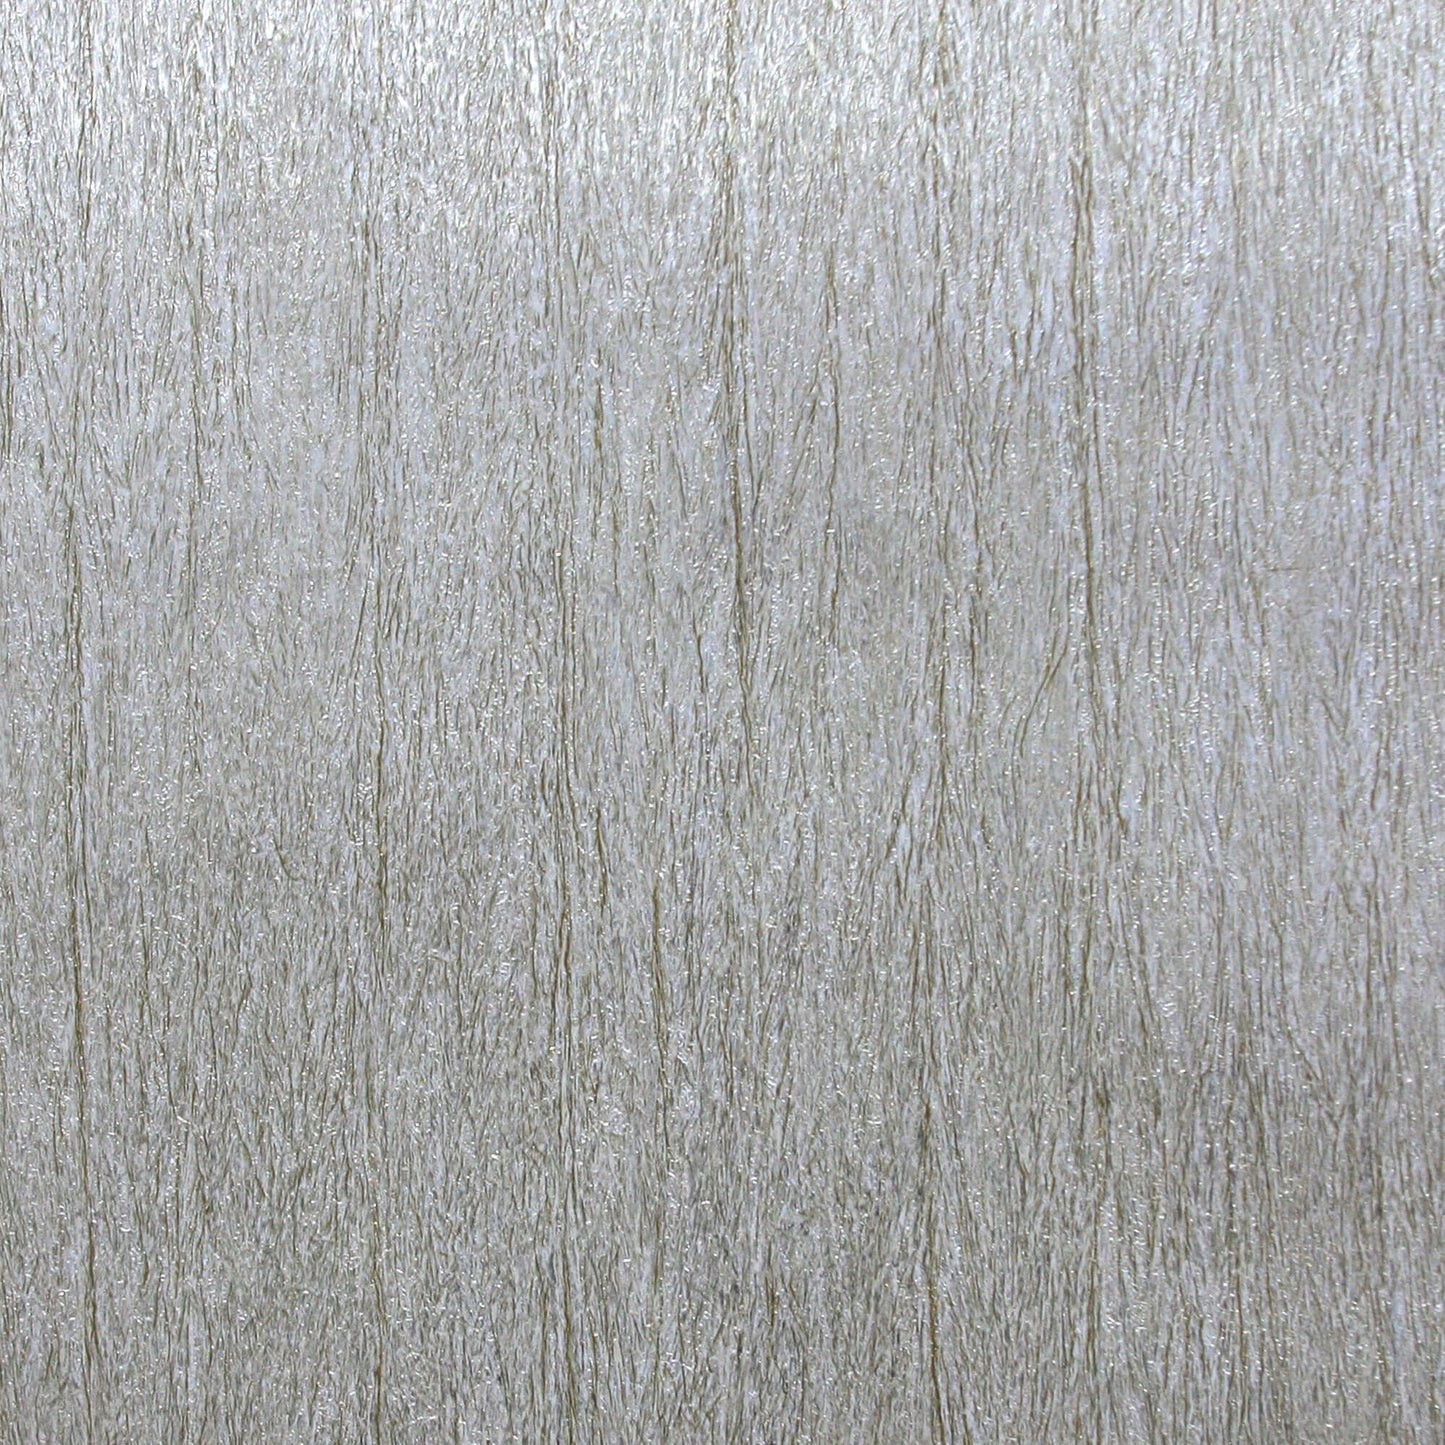 Dazzling Dimensions Natural Texture Wallpaper - SAMPLE ONLY